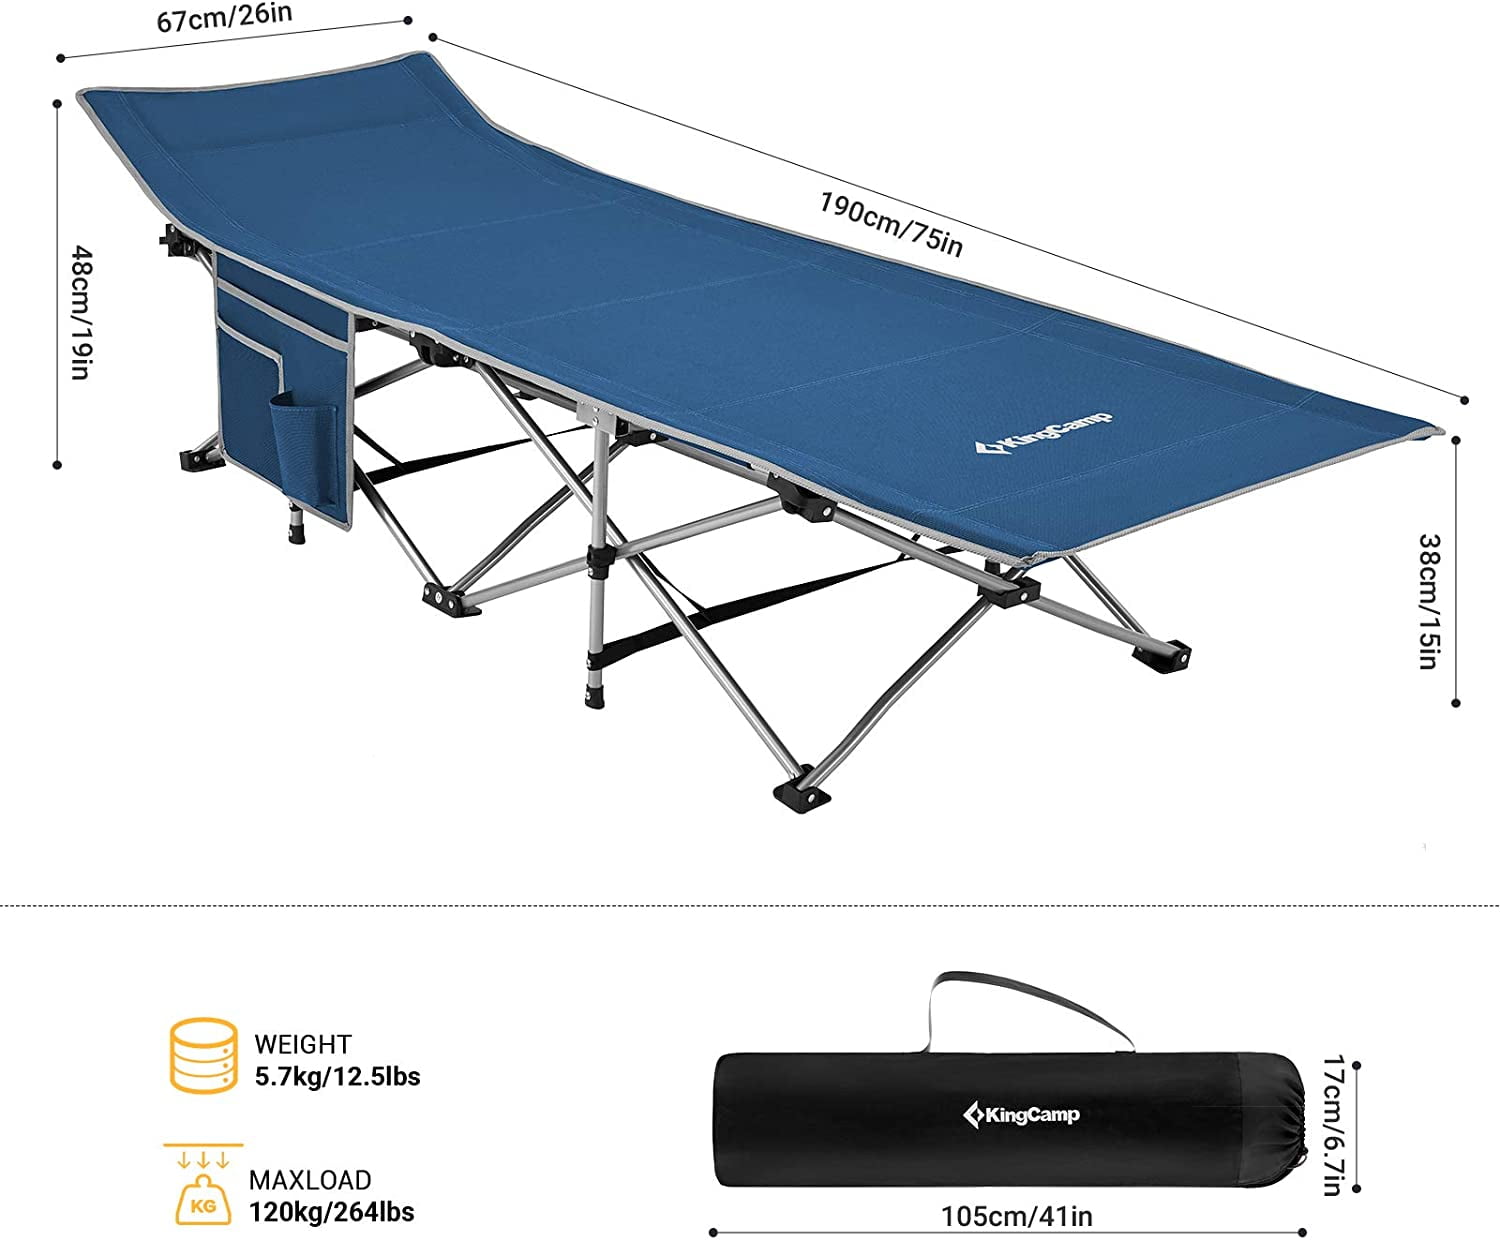 Heavy Duty Adults Portable and Lightweight Cots Single & Double KingCamp Folding Camping Cot Oversized Adjustable Wide Foldable Steel Frame Sleeping Bed for Camp Office Indoor & Outdoor Use 